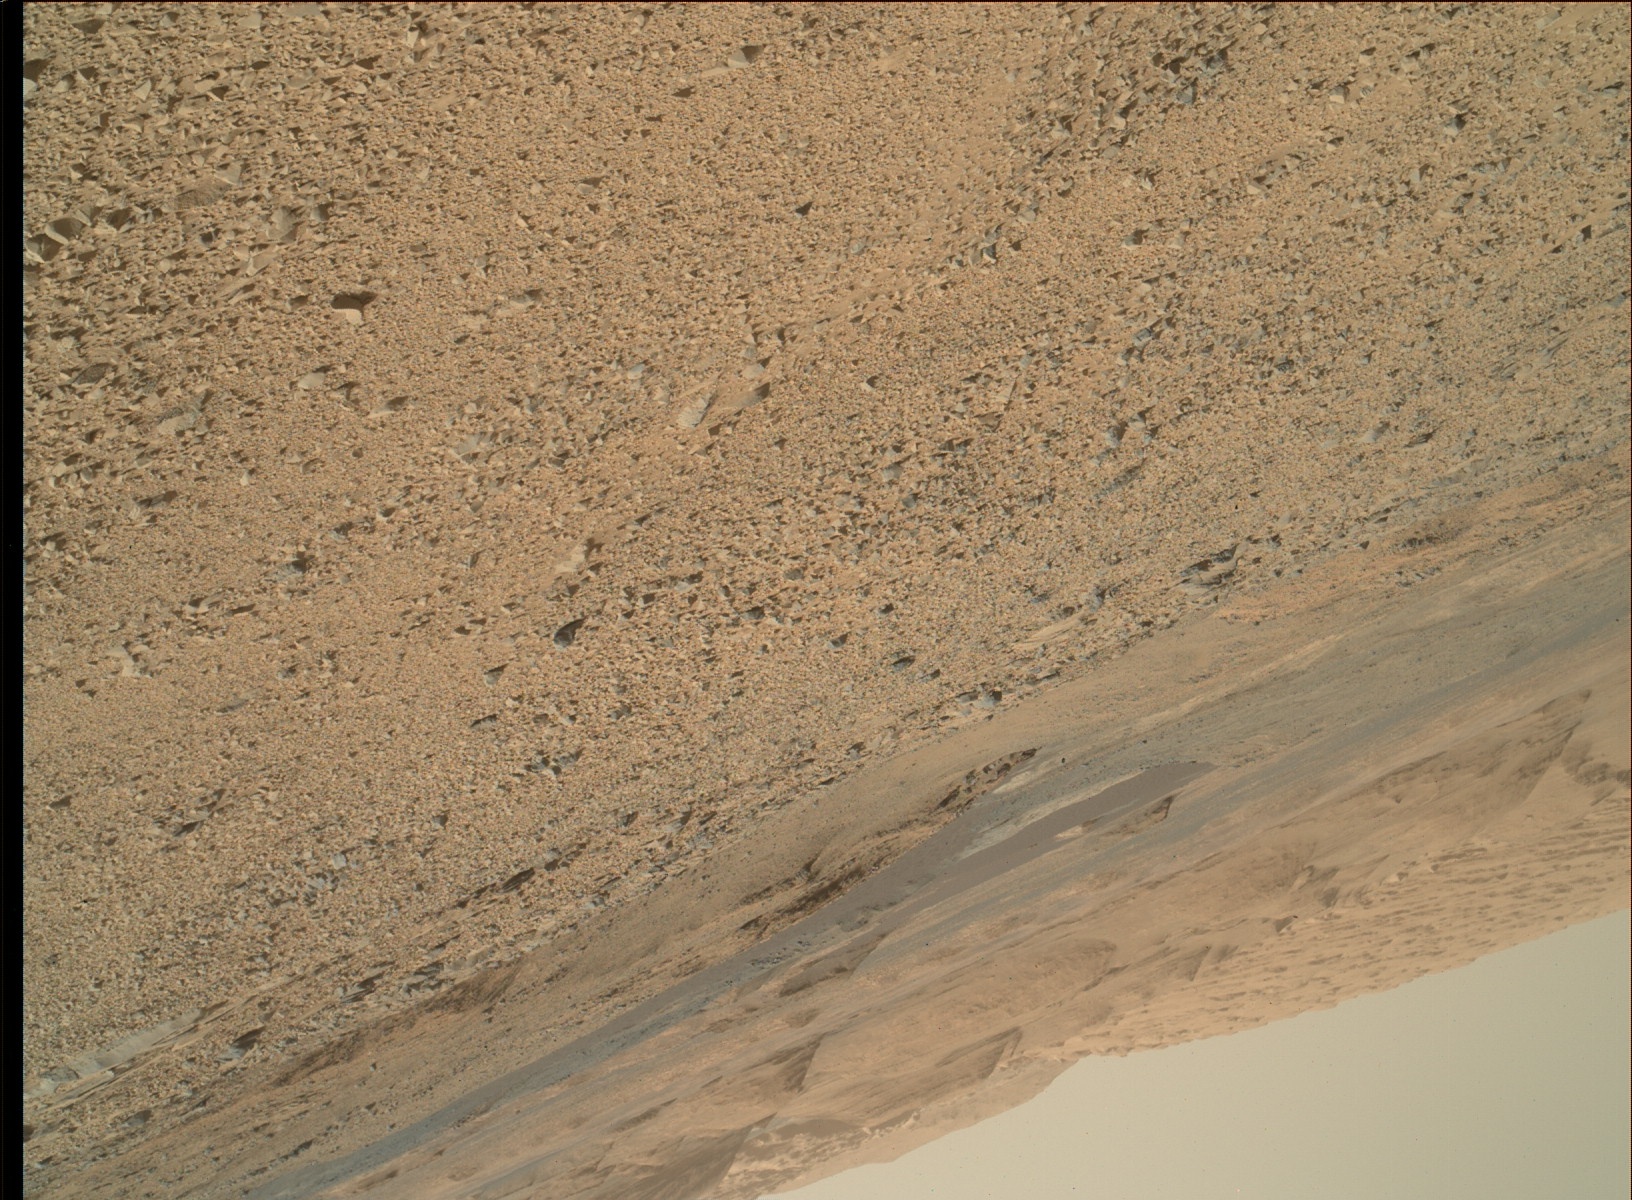 Nasa's Mars rover Curiosity acquired this image using its Mars Hand Lens Imager (MAHLI) on Sol 733